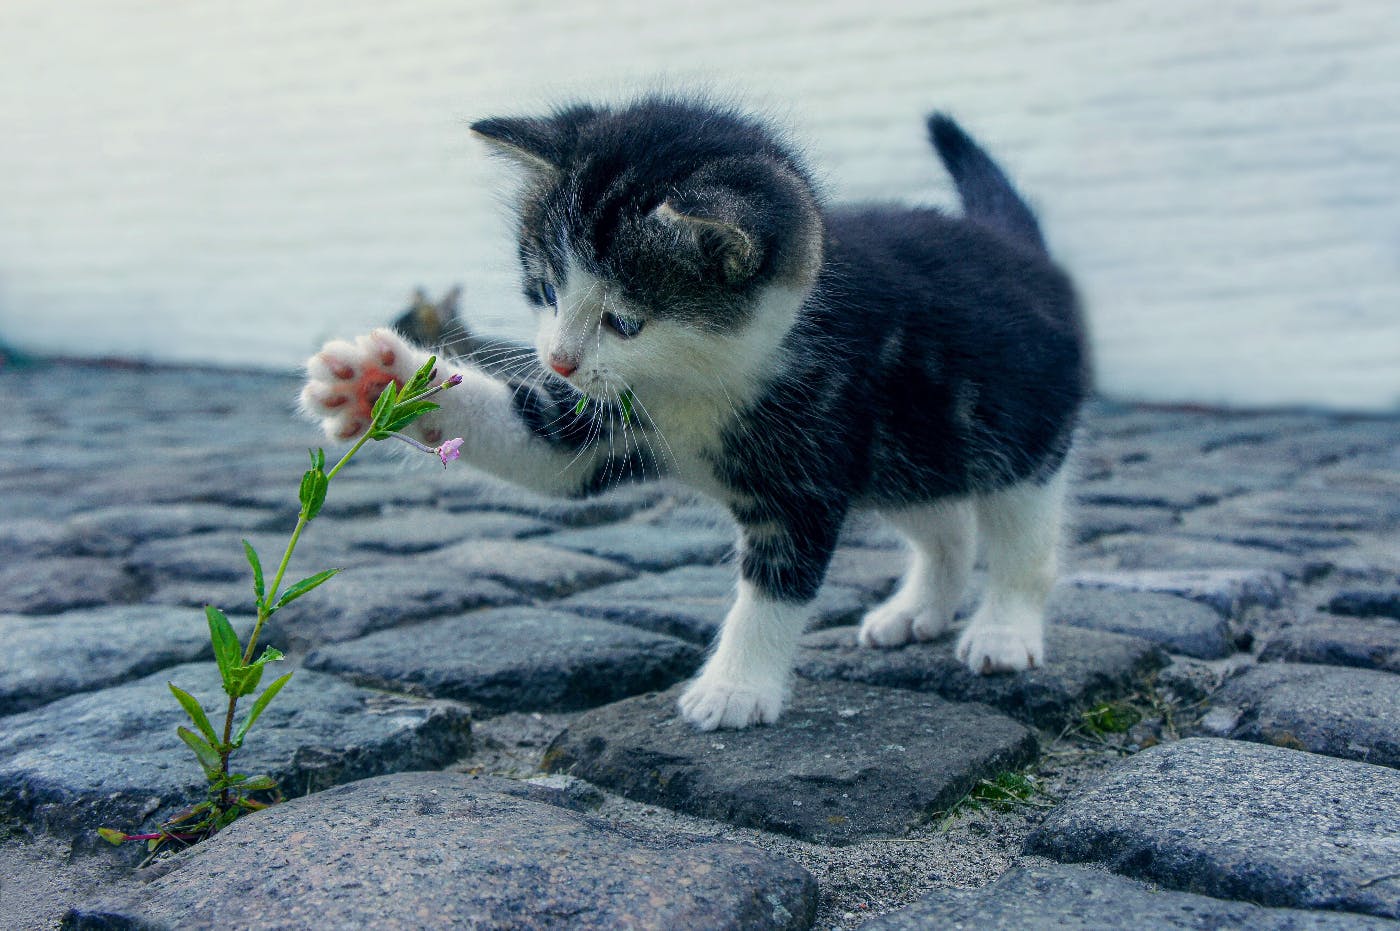 A kitten playing with a weed growing from the cracks on a stone sidewalk.